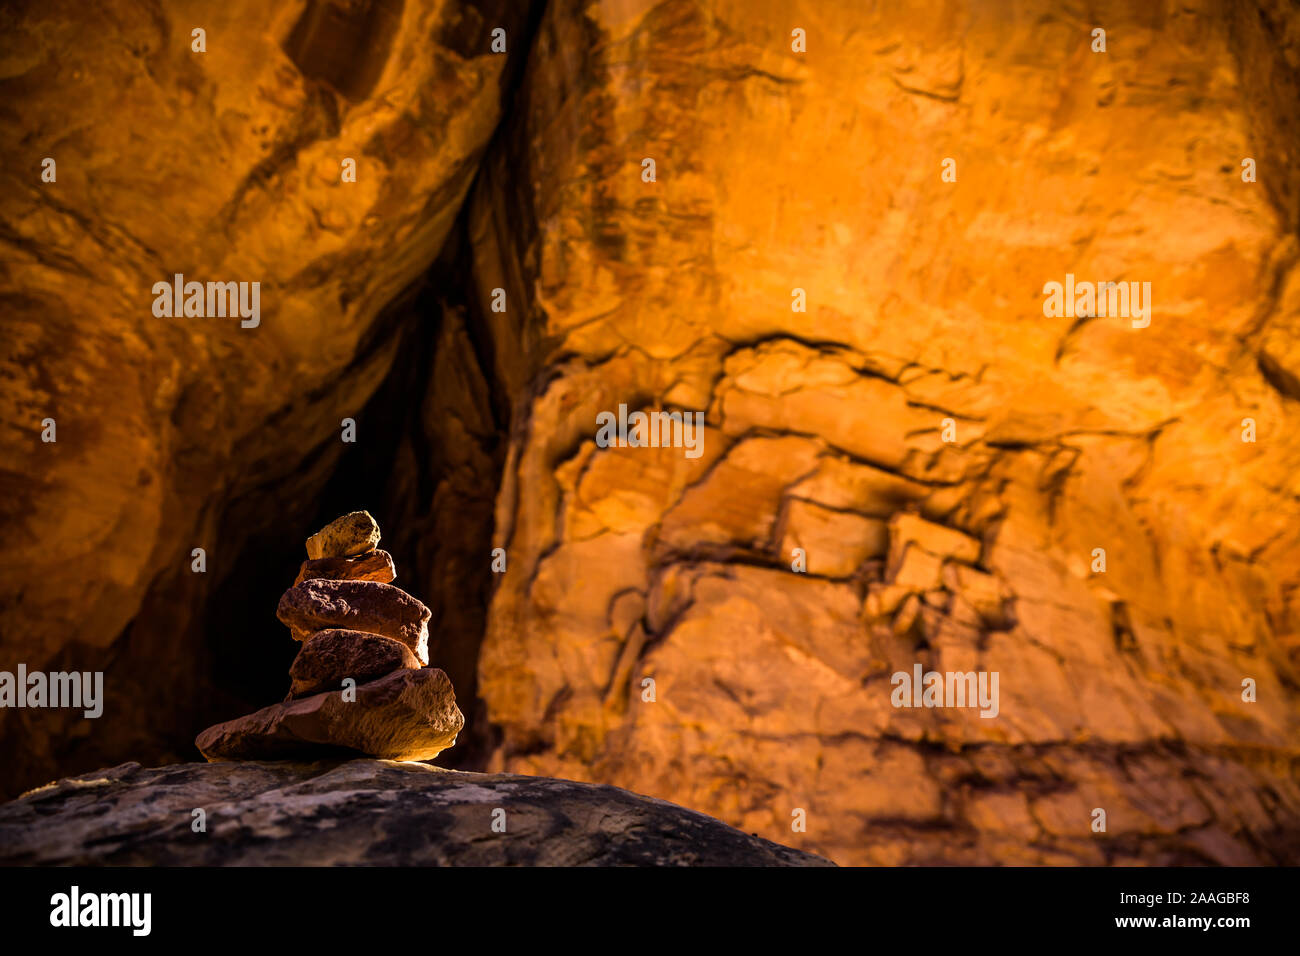 Cairn in narrow canyon with textured sandstone walls of bright orange rock near Moab Utah. Joint Trail through Canyonlands National Park. Stock Photo